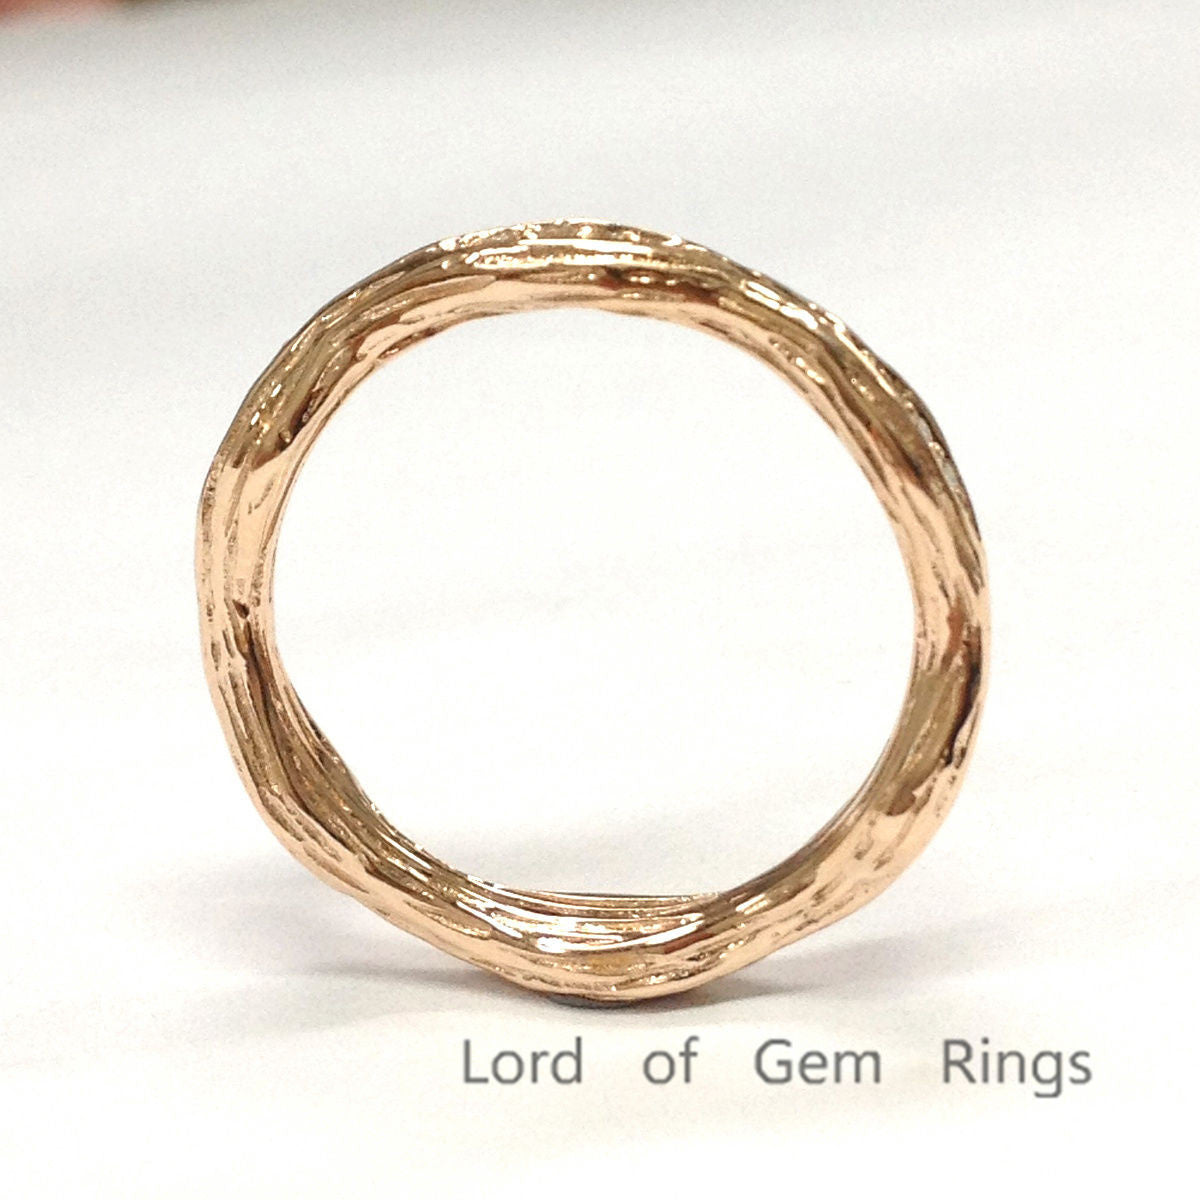 Pave Diamond Wedding Band Eternity Anniversary Ring 14K Rose Gold Art Deco Hand Crafted Twig - Lord of Gem Rings - 4